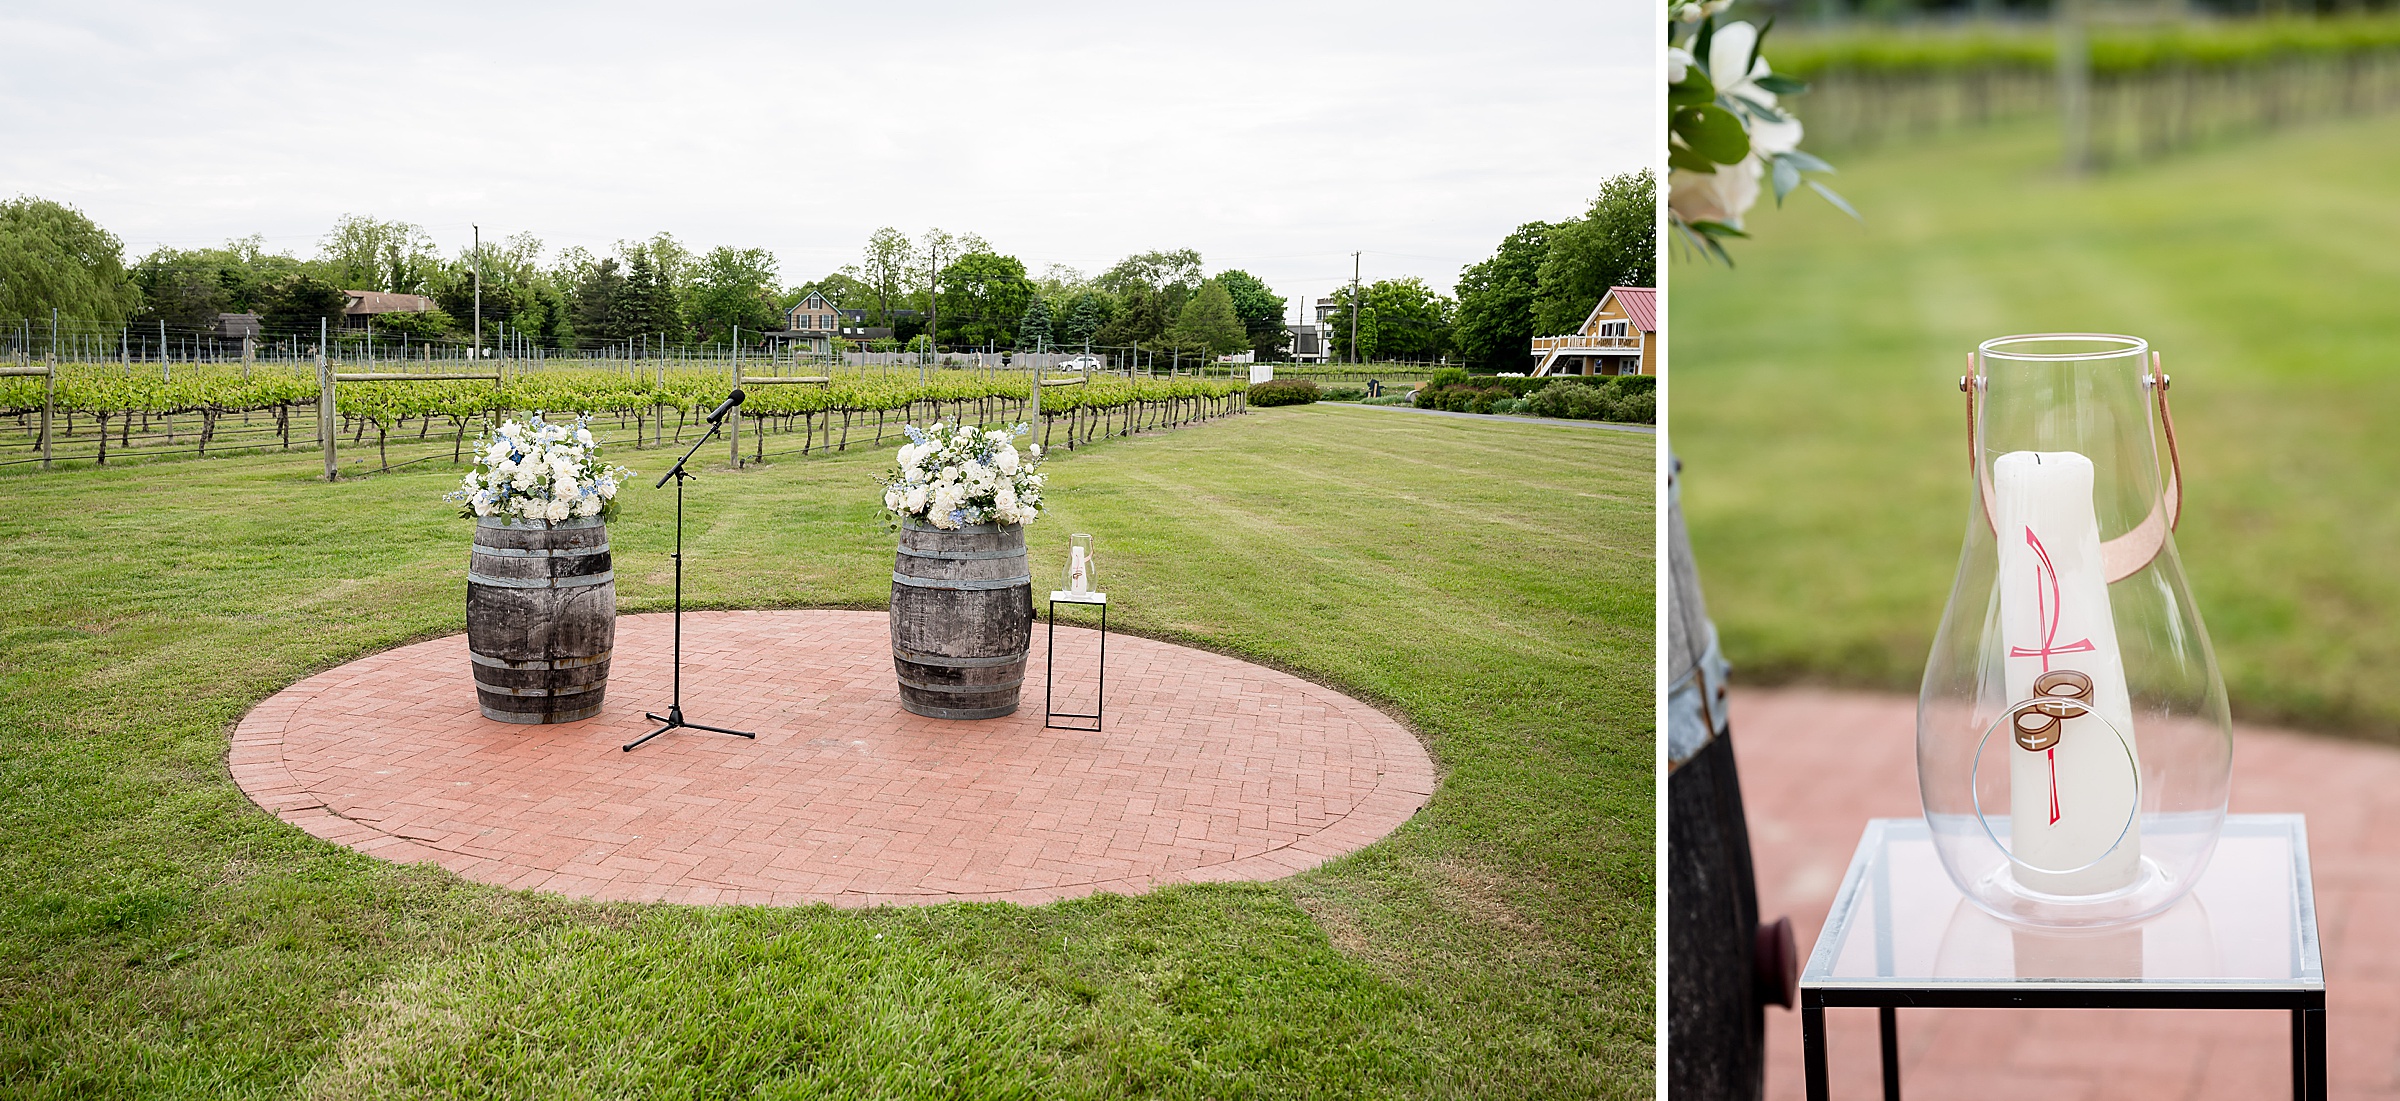 An outdoor wedding setup with two wooden barrels topped with white flower arrangements and a microphone stand on a brick platform, placed on a lawn. A close-up shows a glass vase holding a candle and ribbon.